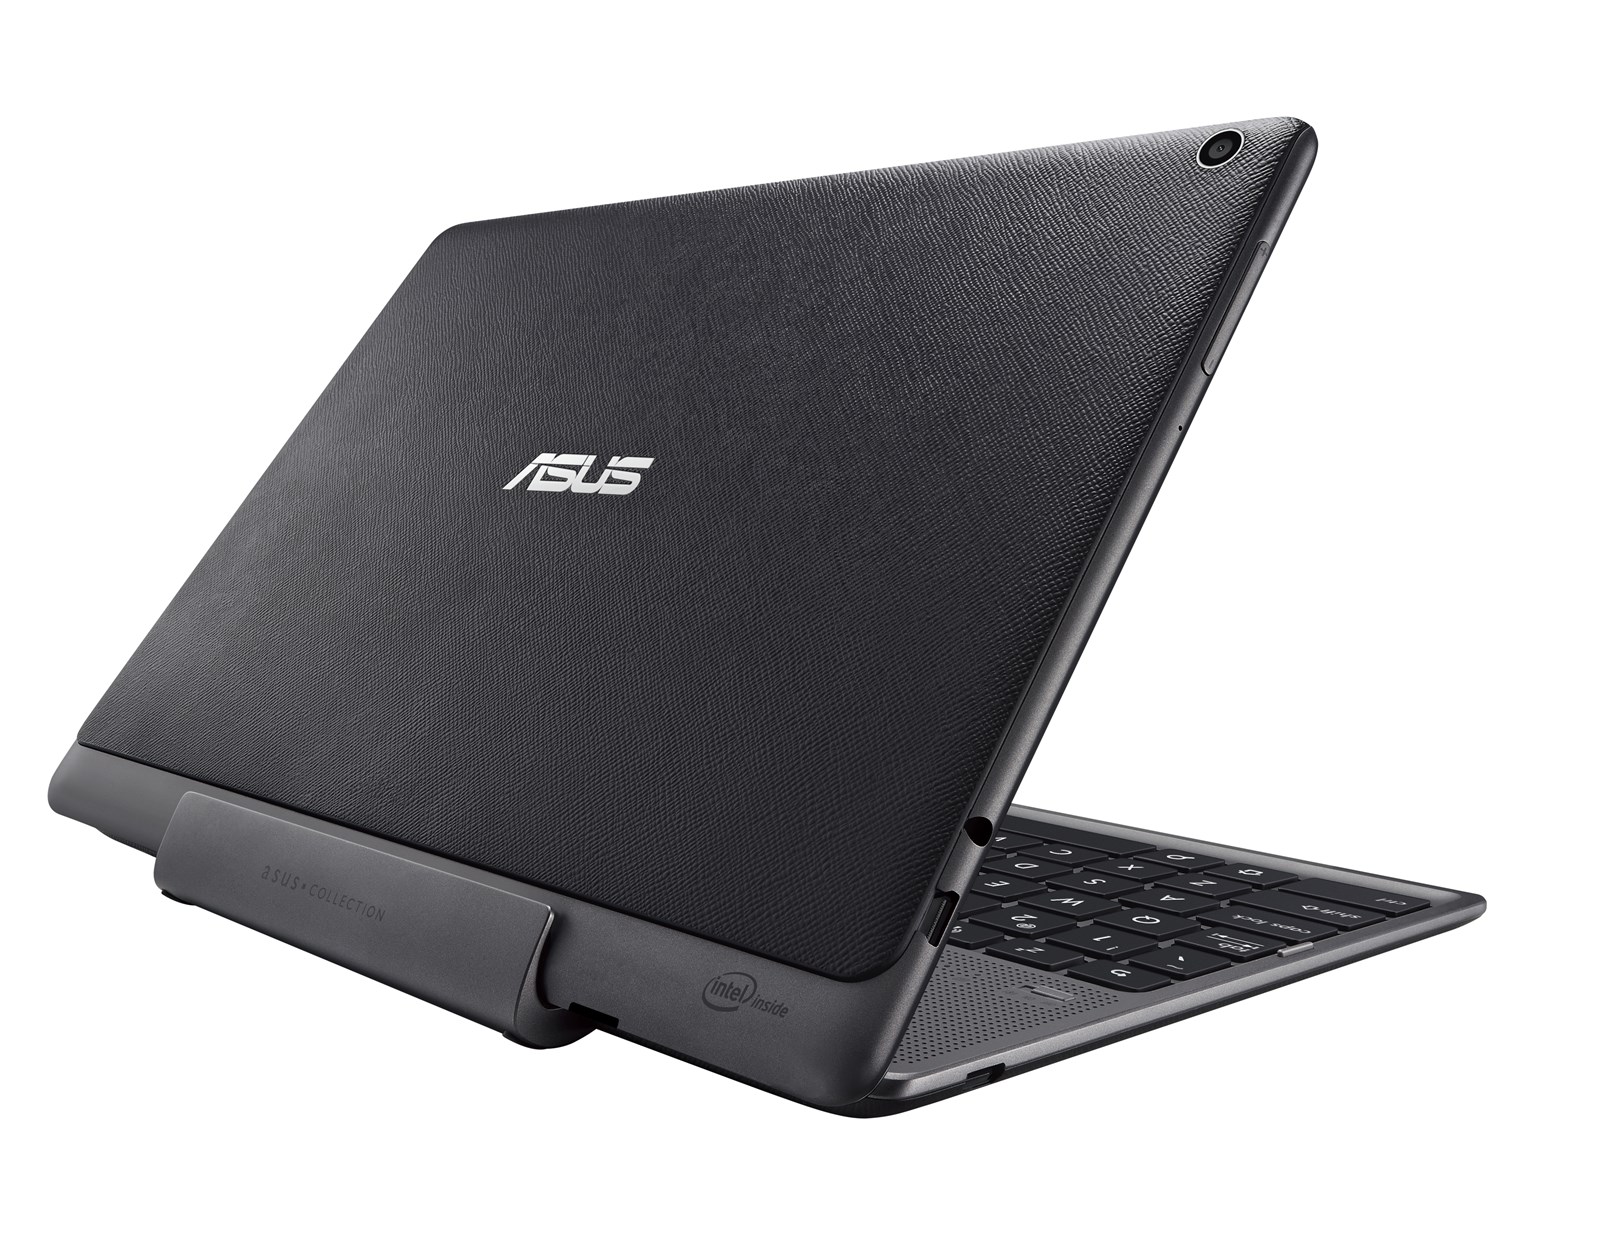 Krigsfanger Manifold stenografi ZenPad Cases and Accessories for Asus Tablets